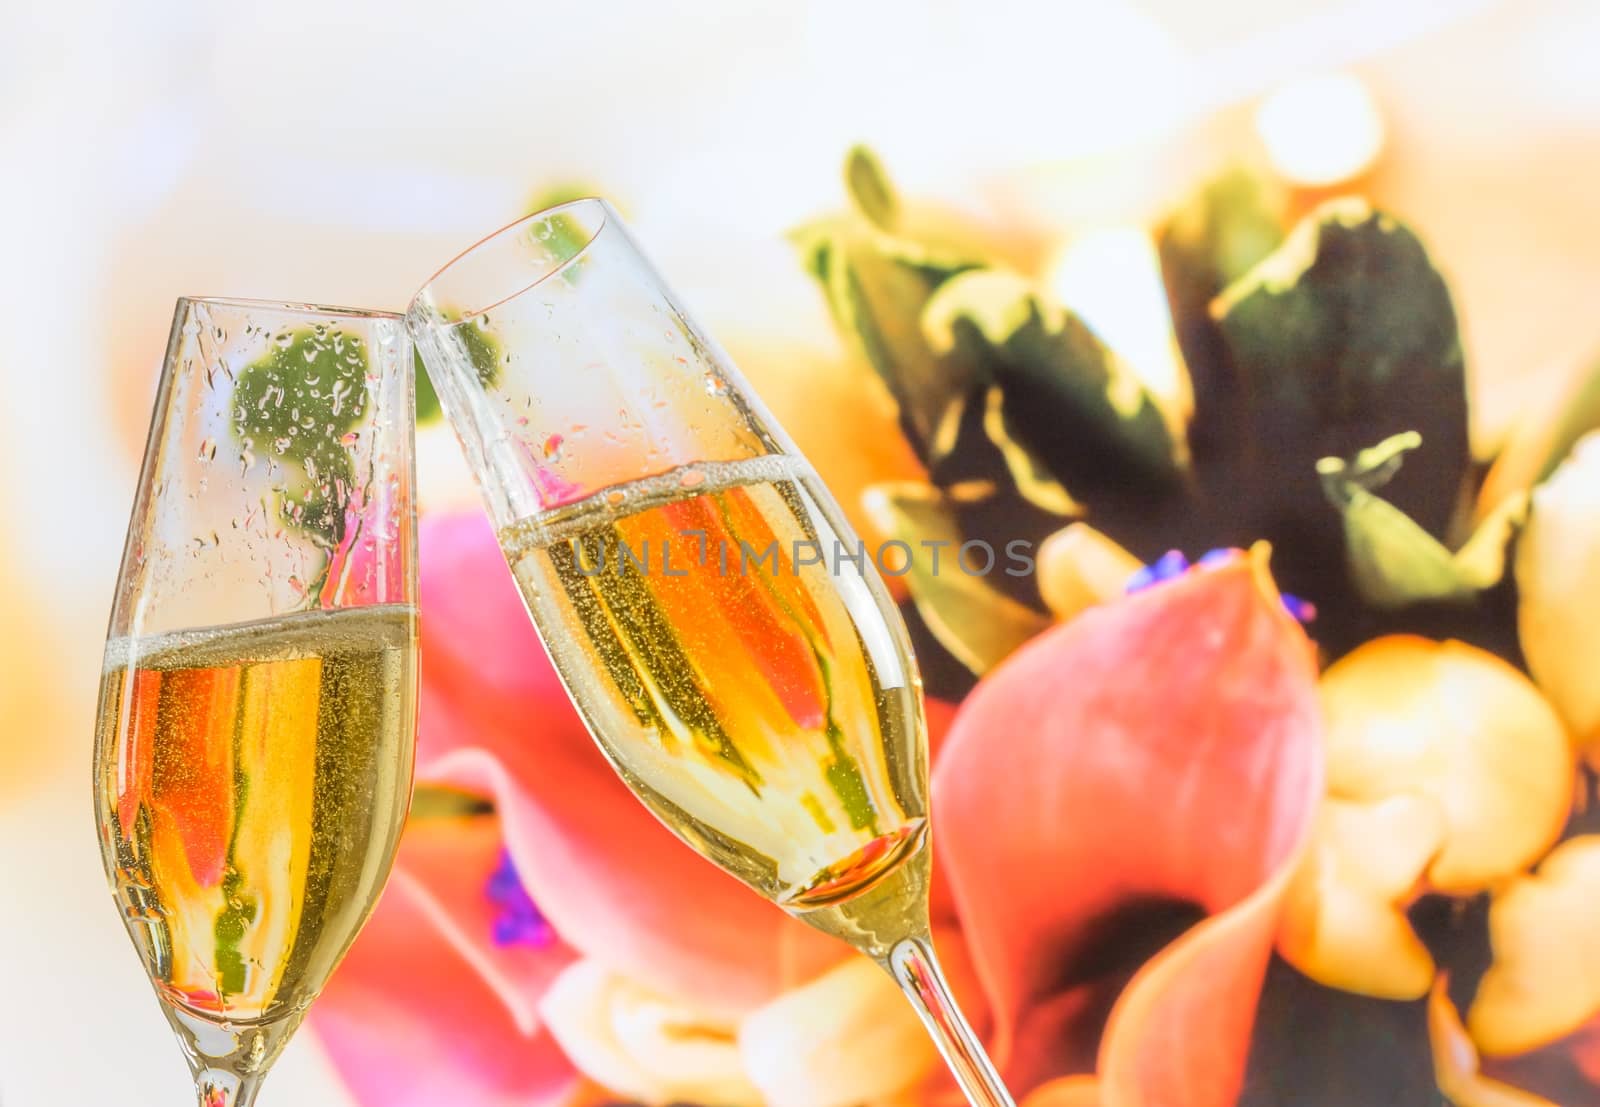 champagne flutes with golden bubbles on wedding flowers background by donfiore